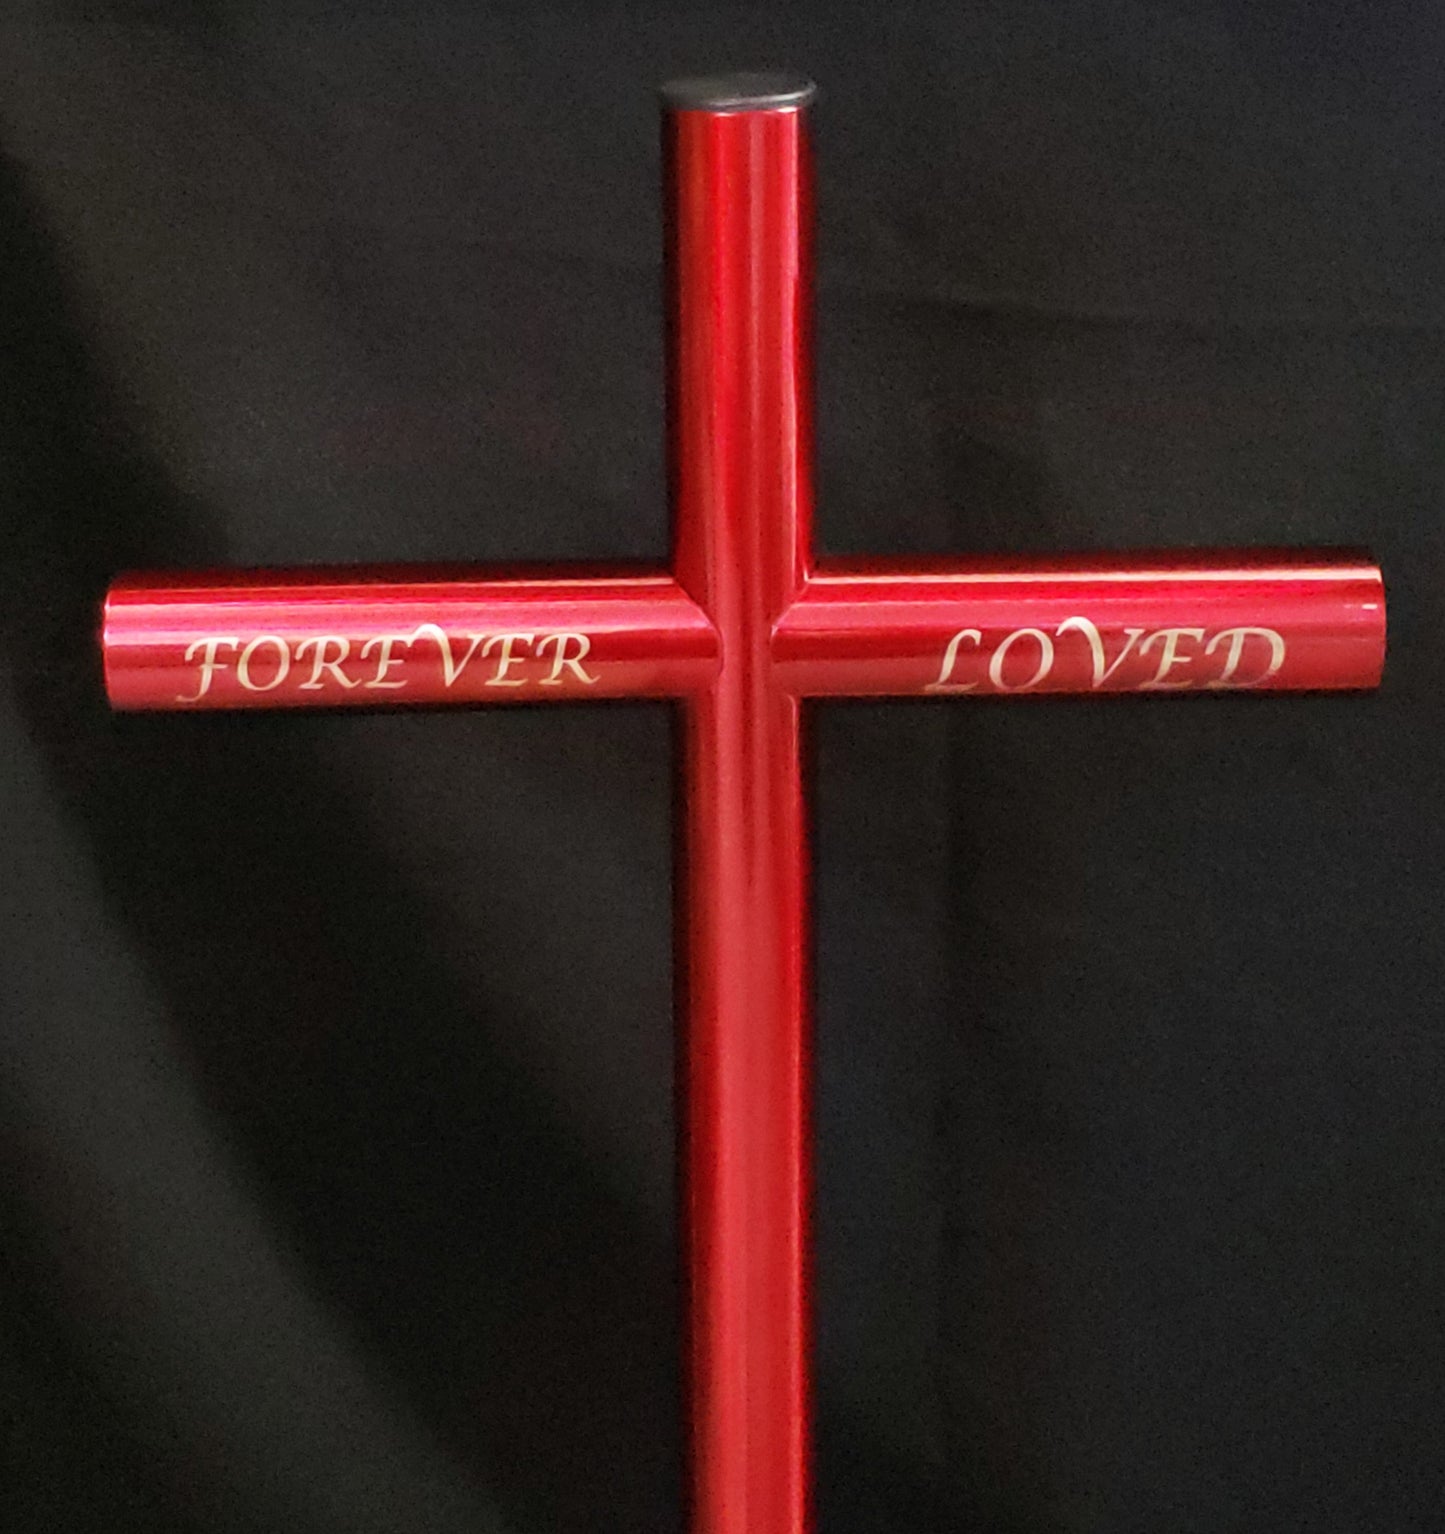 Red Everlasting Cross Memorial Engraved Forever Loved. Outside Memorial for Cat, Dog, Mother, Father, Sister, Brother Or Any Loved One Passed. Cremation Urn Can Be Fore Ashes, Keepsake Capsule For Burial. Place In Garden, By A Tree, Gravesite